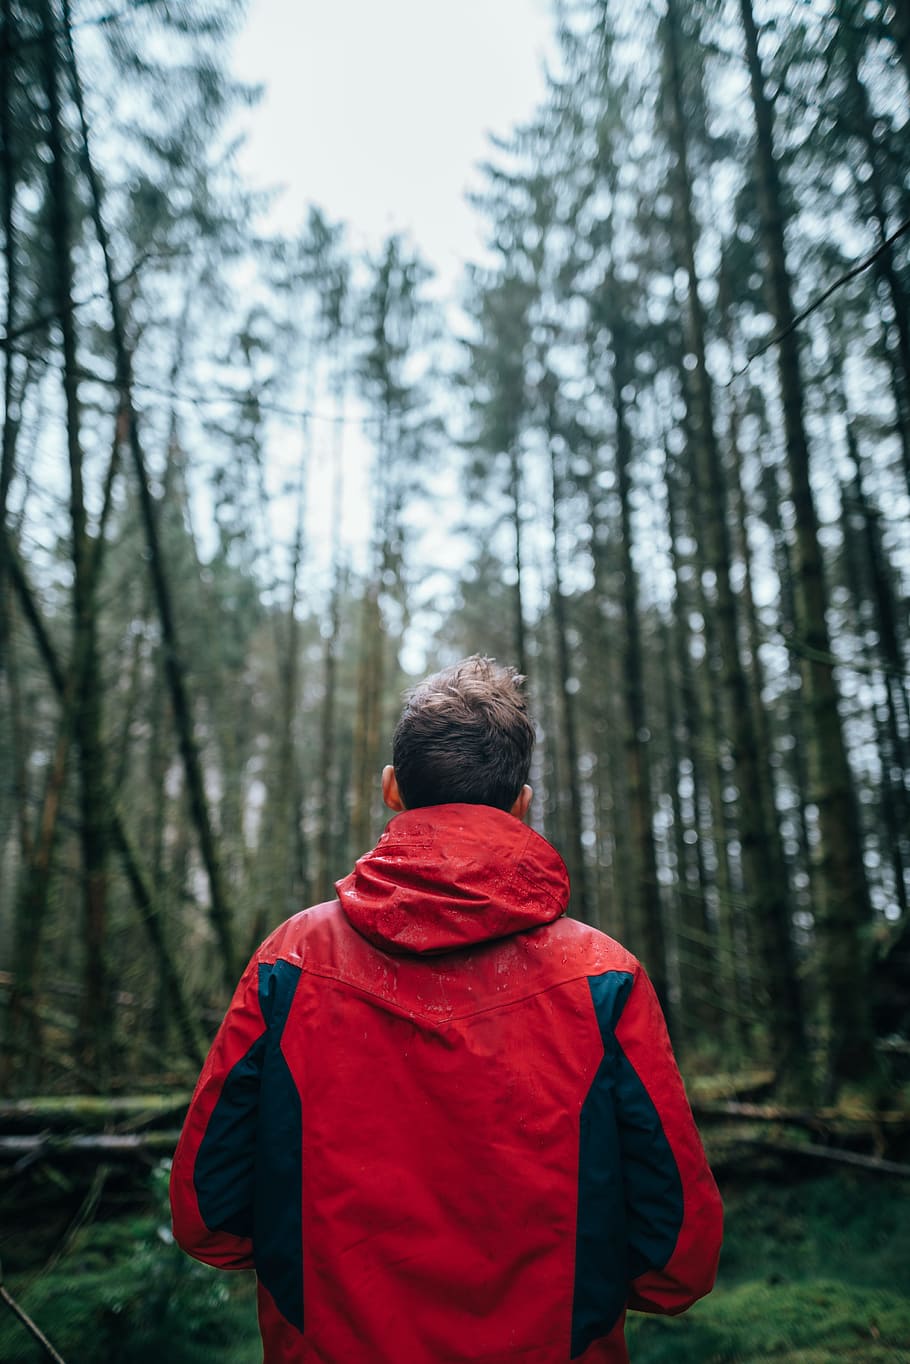 Photography of Man Wearing Black and Red Jacket Standing in Forest, HD wallpaper